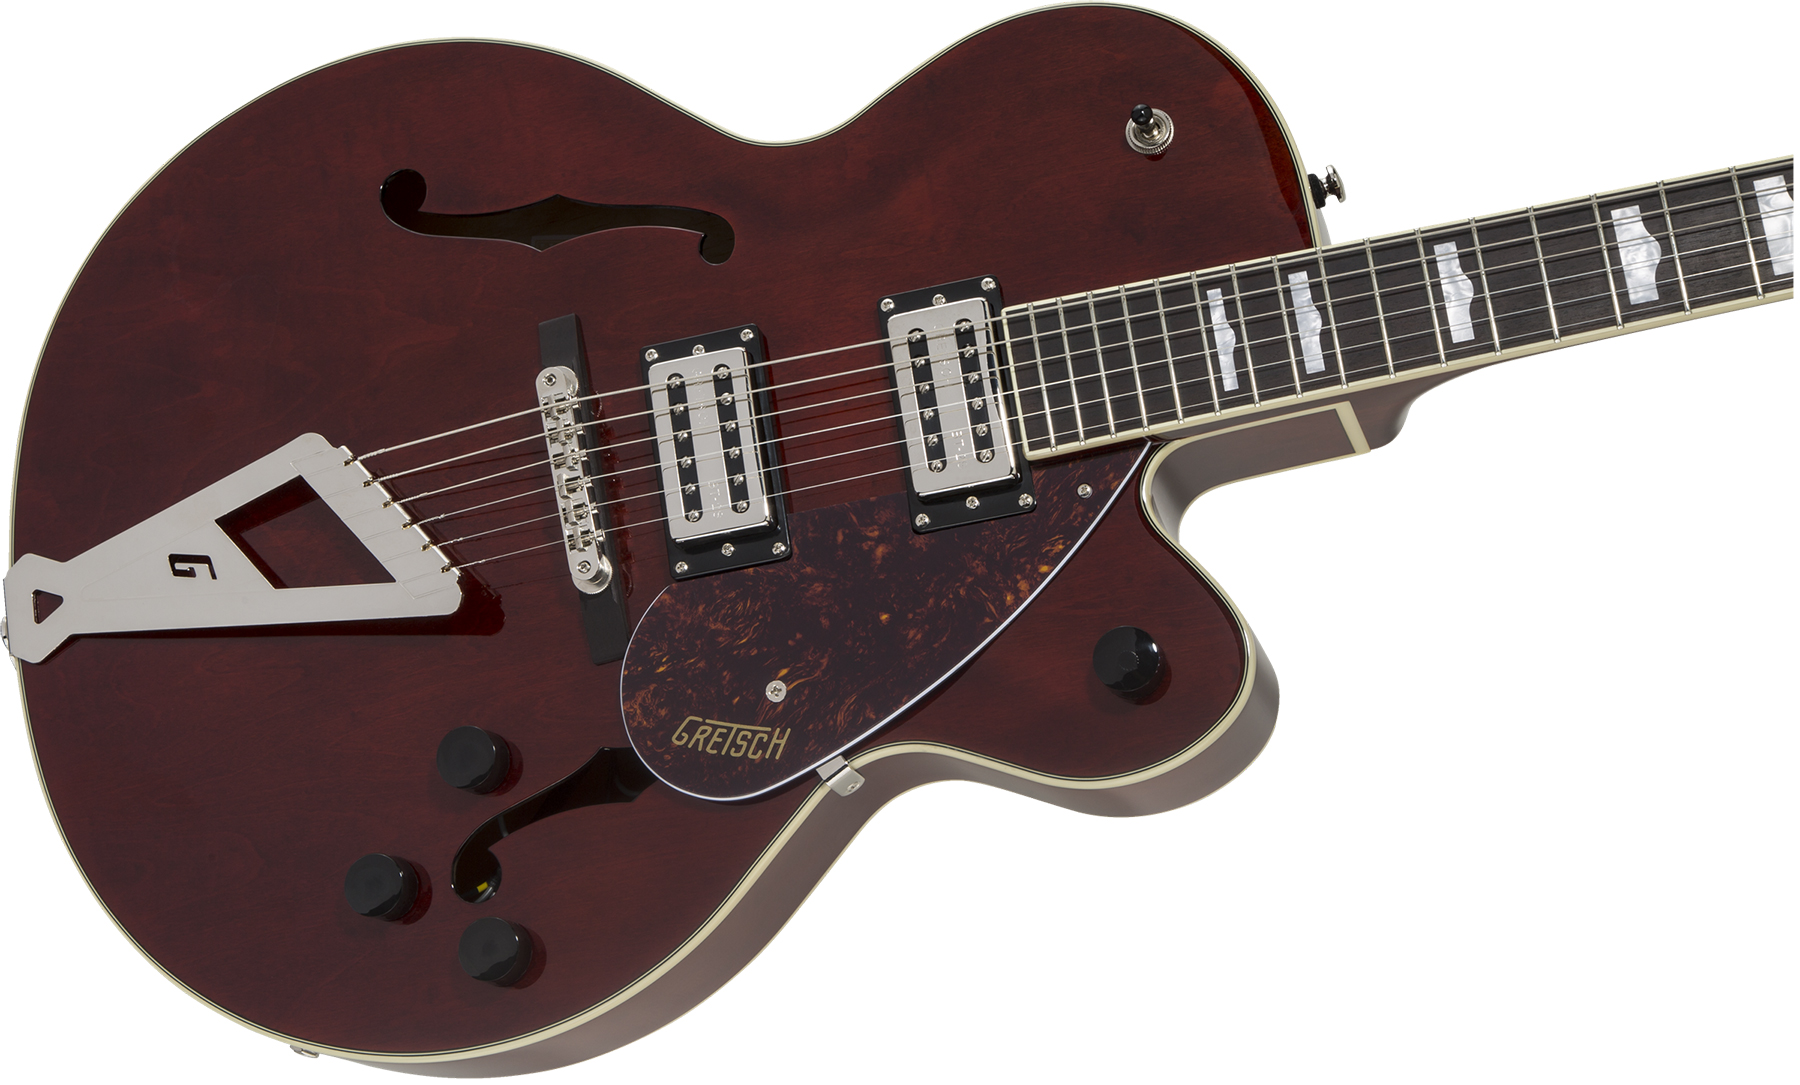 Gretsch G2420 Streamliner Hollow Body With Chromatic Ii Hh Ht Lau - Walnut - Guitare Électrique 1/2 Caisse - Variation 2